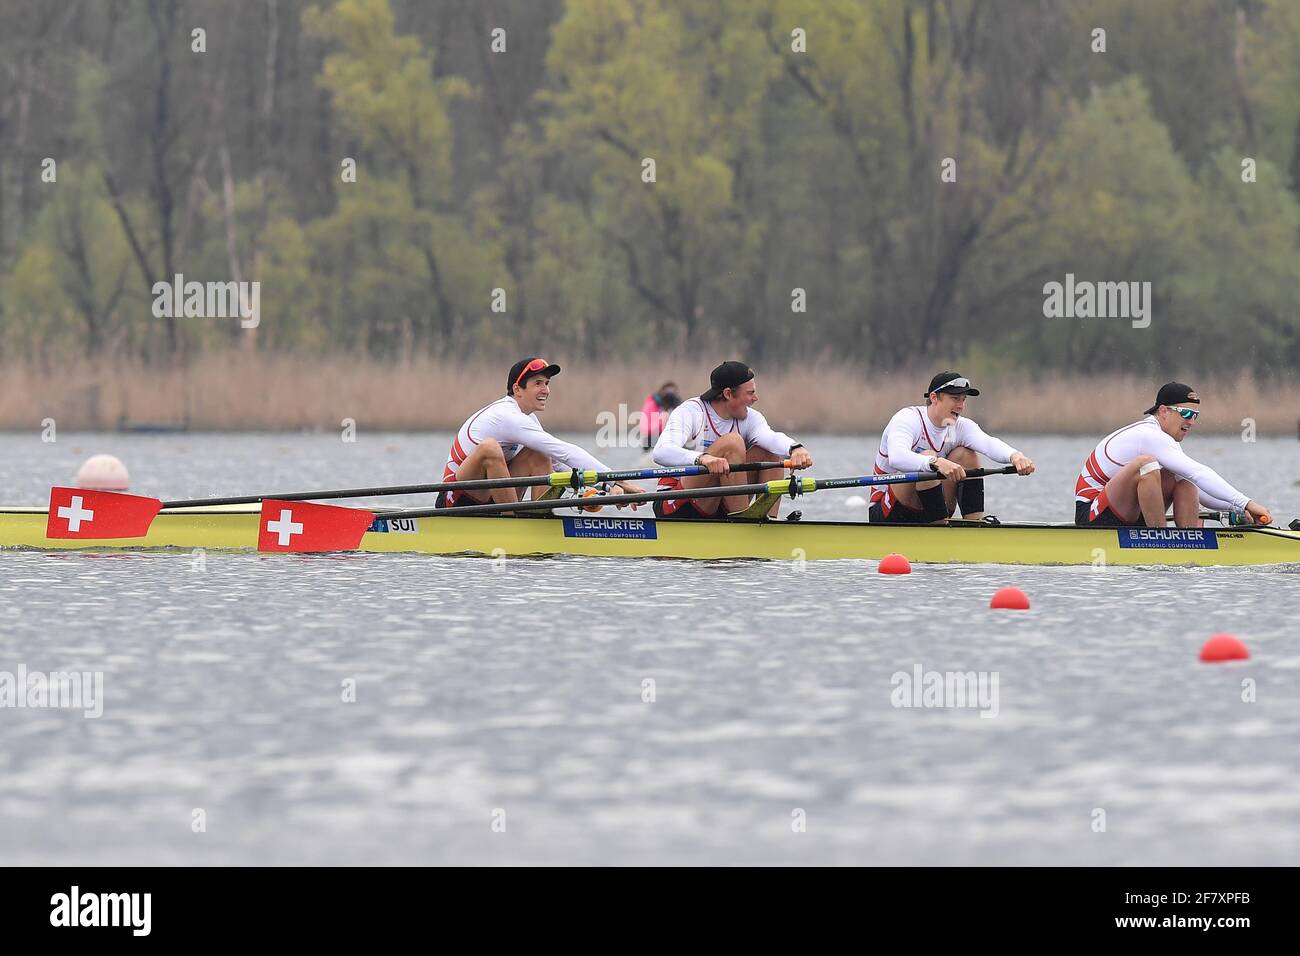 Varese, Italy. 10th Apr, 2021. Markus Kessler, Paul Jacquot, Joel Schuerch, Andrin Gulich (SUI), Men's Four during European Rowing Championships 2021, Canoying in Varese, Italy, April 10 2021 Credit: Independent Photo Agency/Alamy Live News Stock Photo